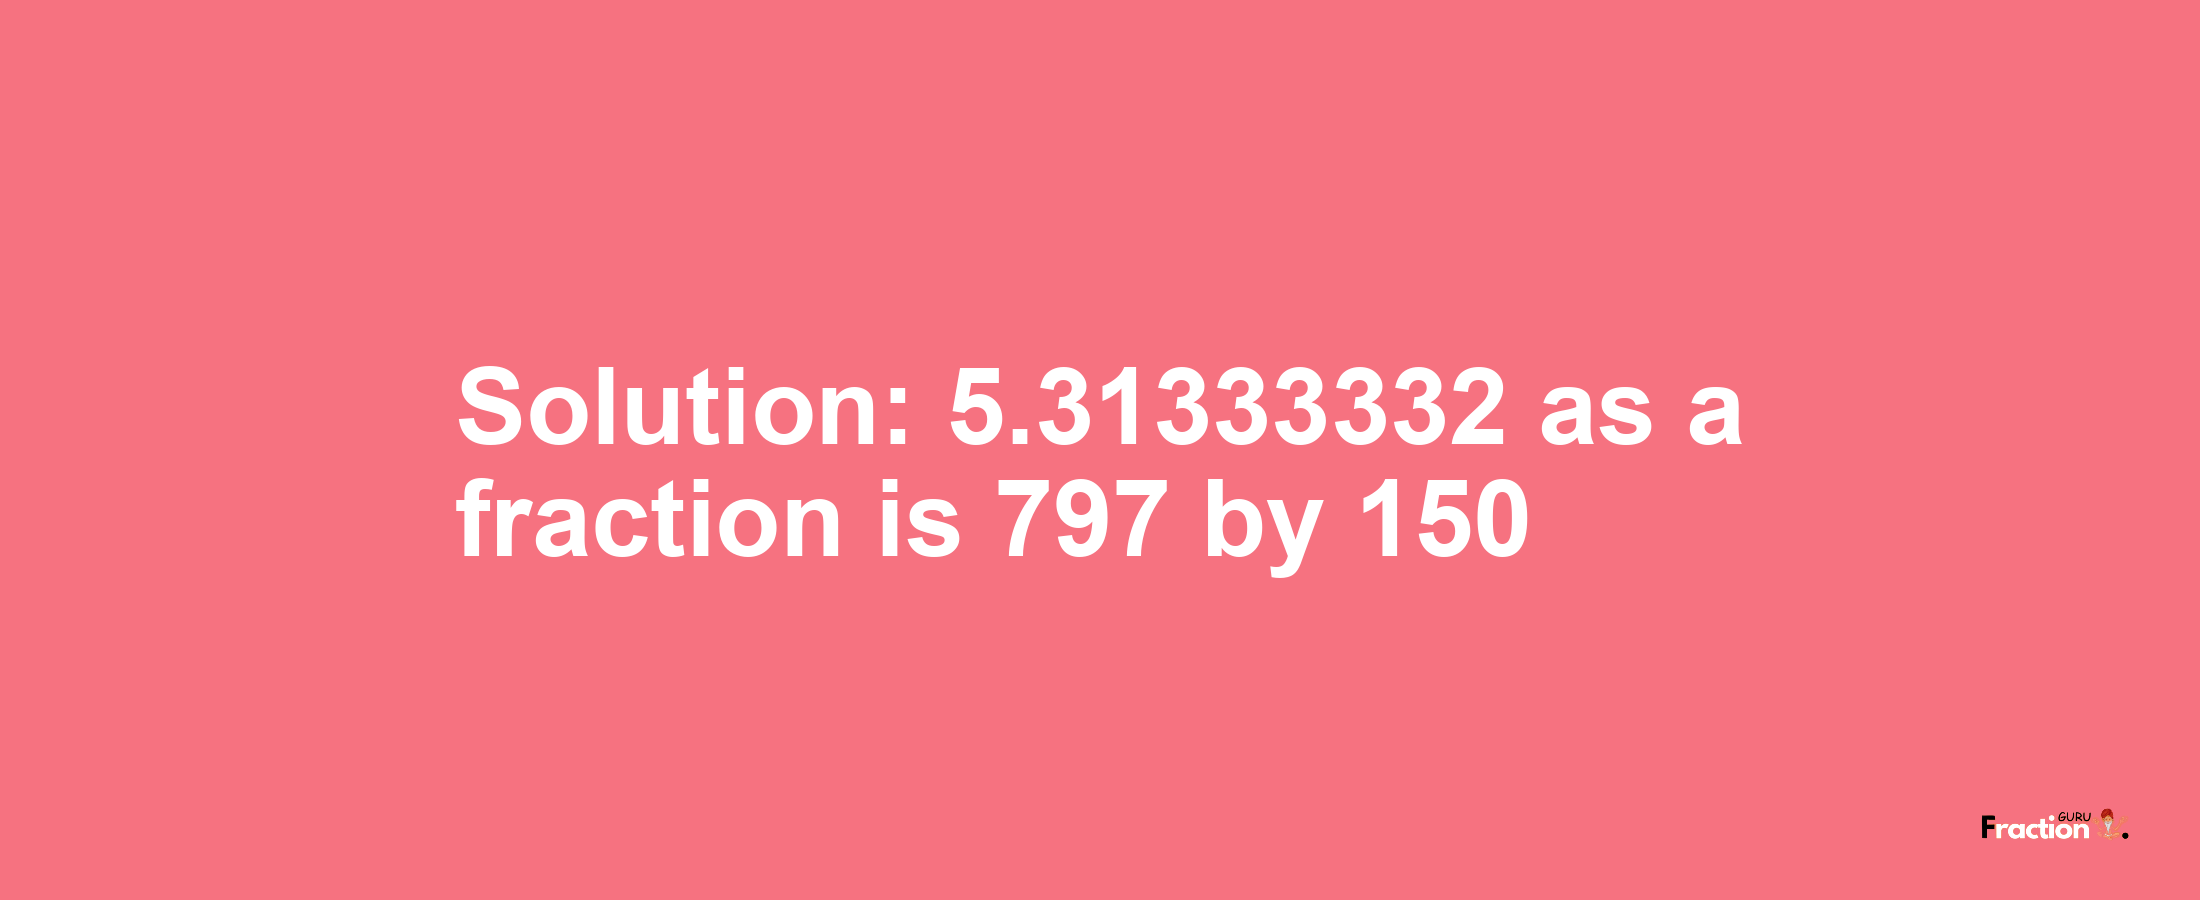 Solution:5.31333332 as a fraction is 797/150